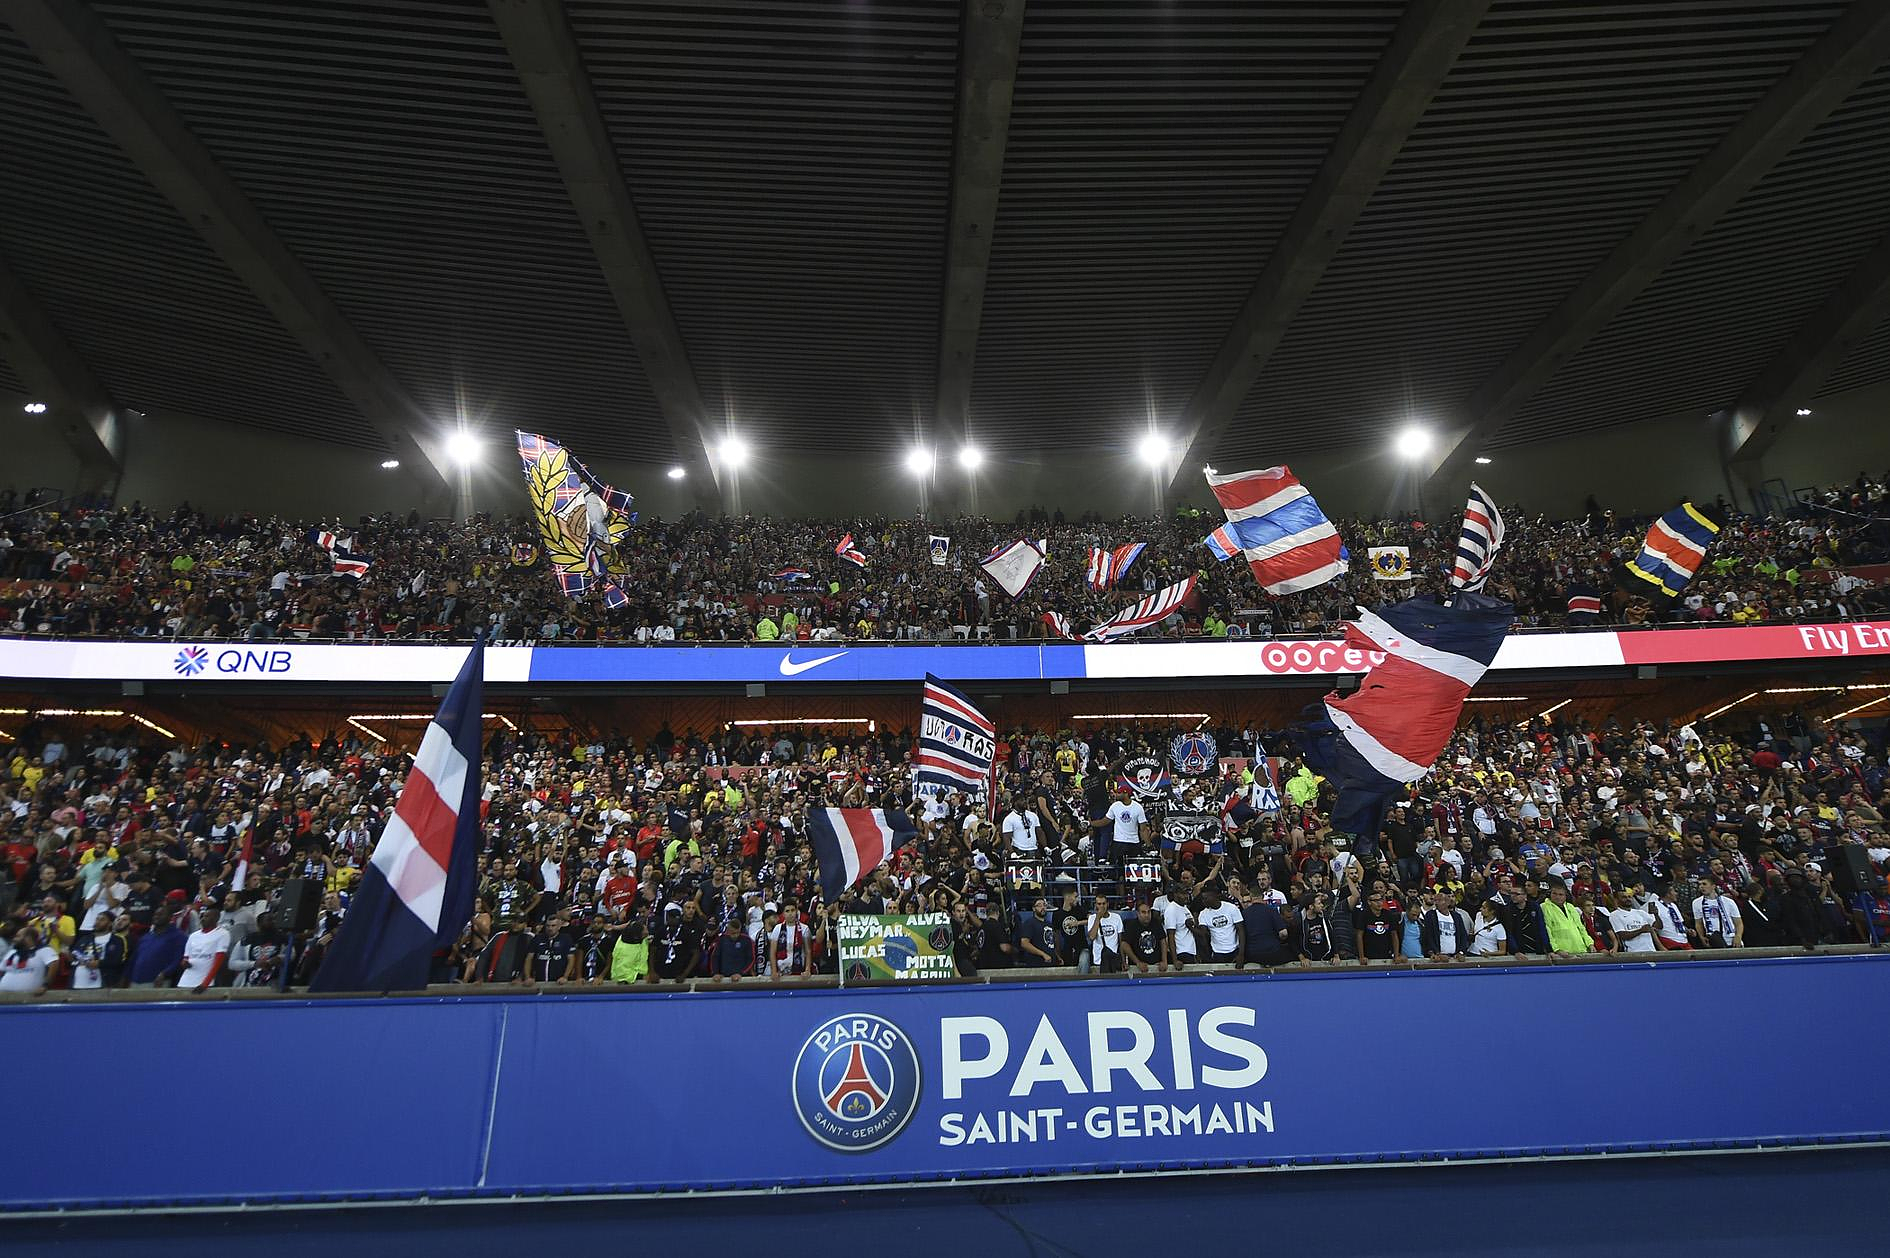 Ligue 1: Darmanin bans PSG and Nantes supporters from traveling to Marseille and Nice